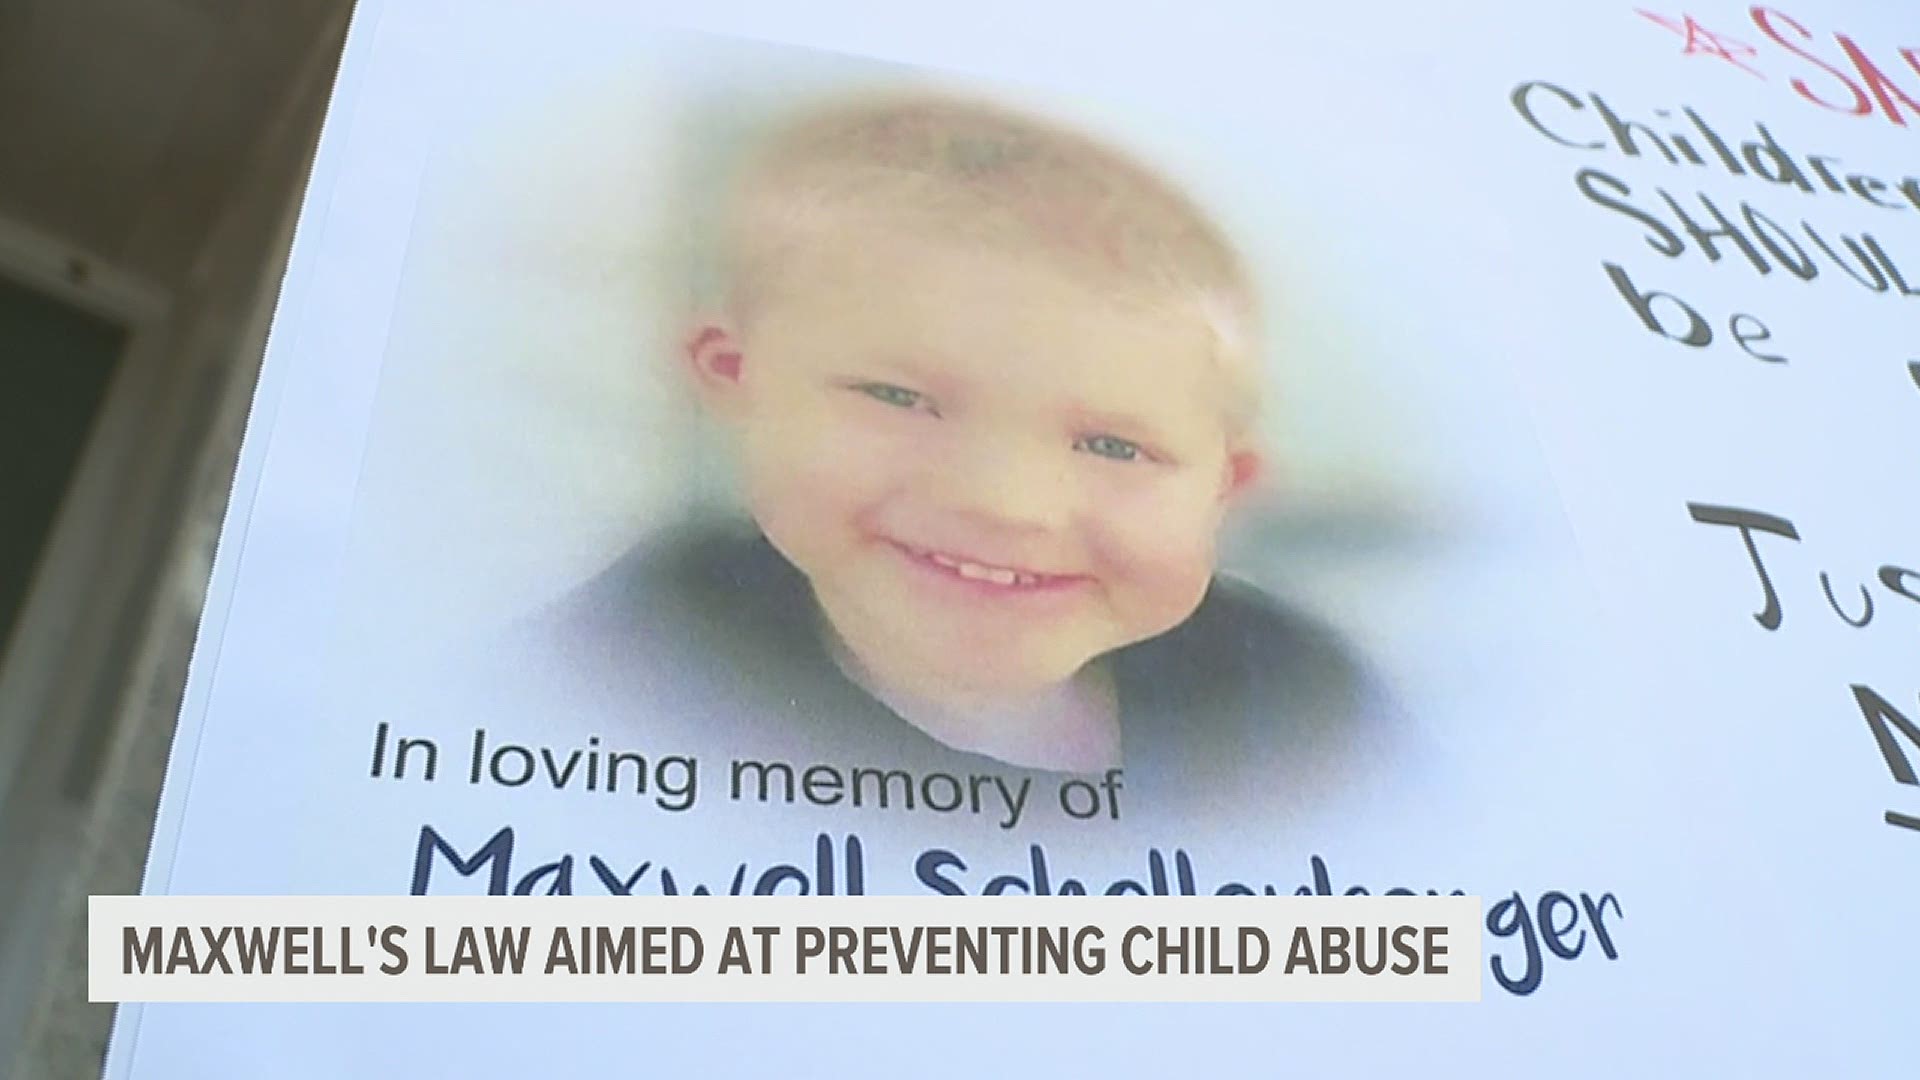 A 12-year-old boy in Lebanon County who died after years of alleged abuse and neglect, causing a community to be outraged, is not being forgotten